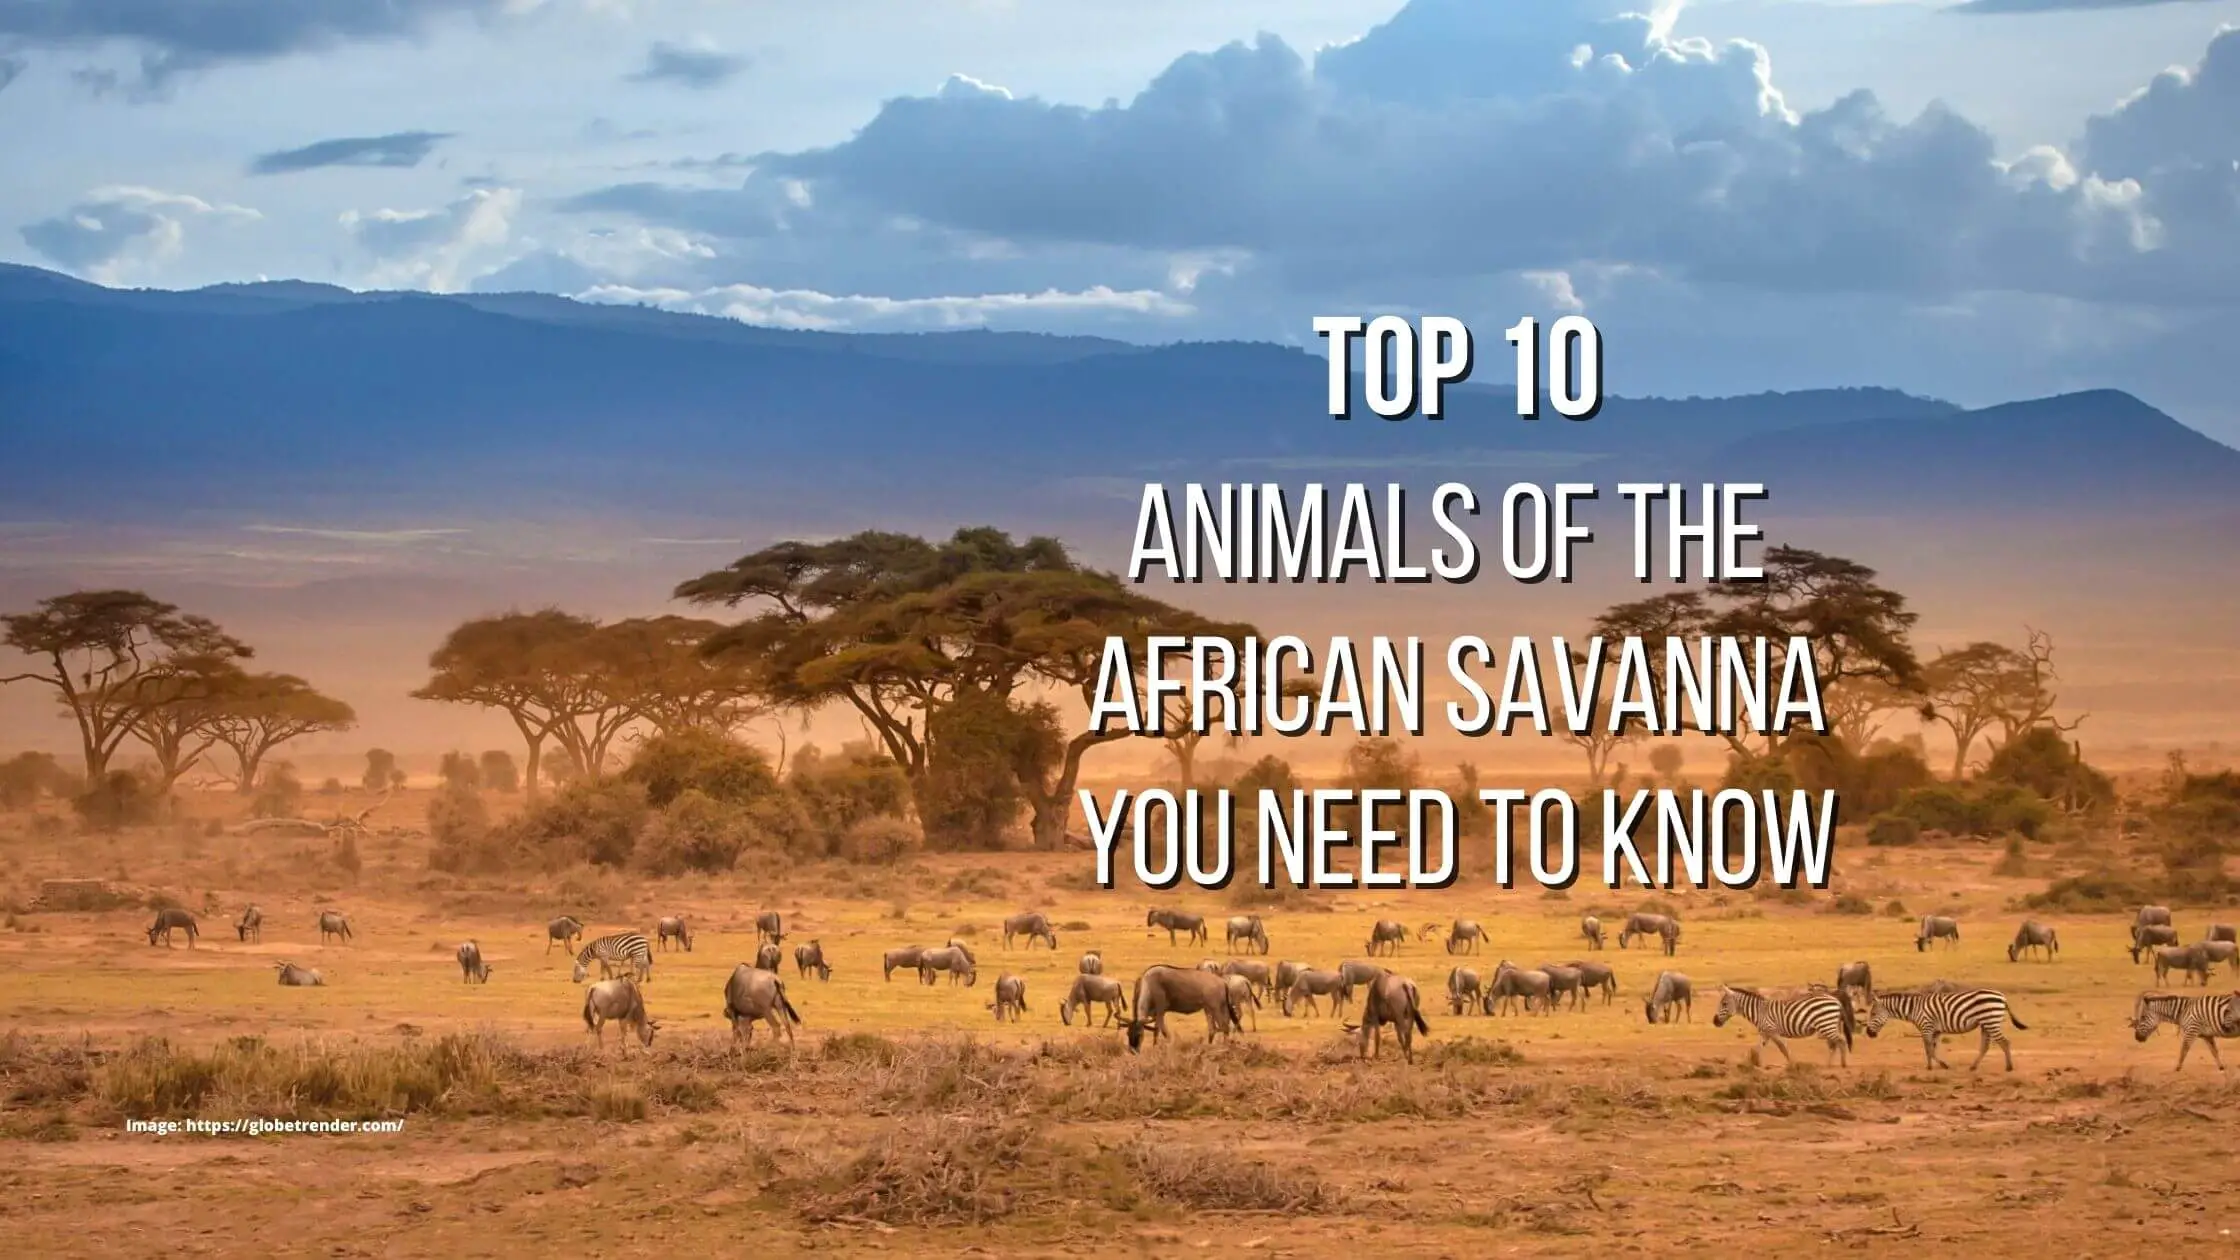 Top 10 Animals of the African Savanna you need to know - Proto Animal